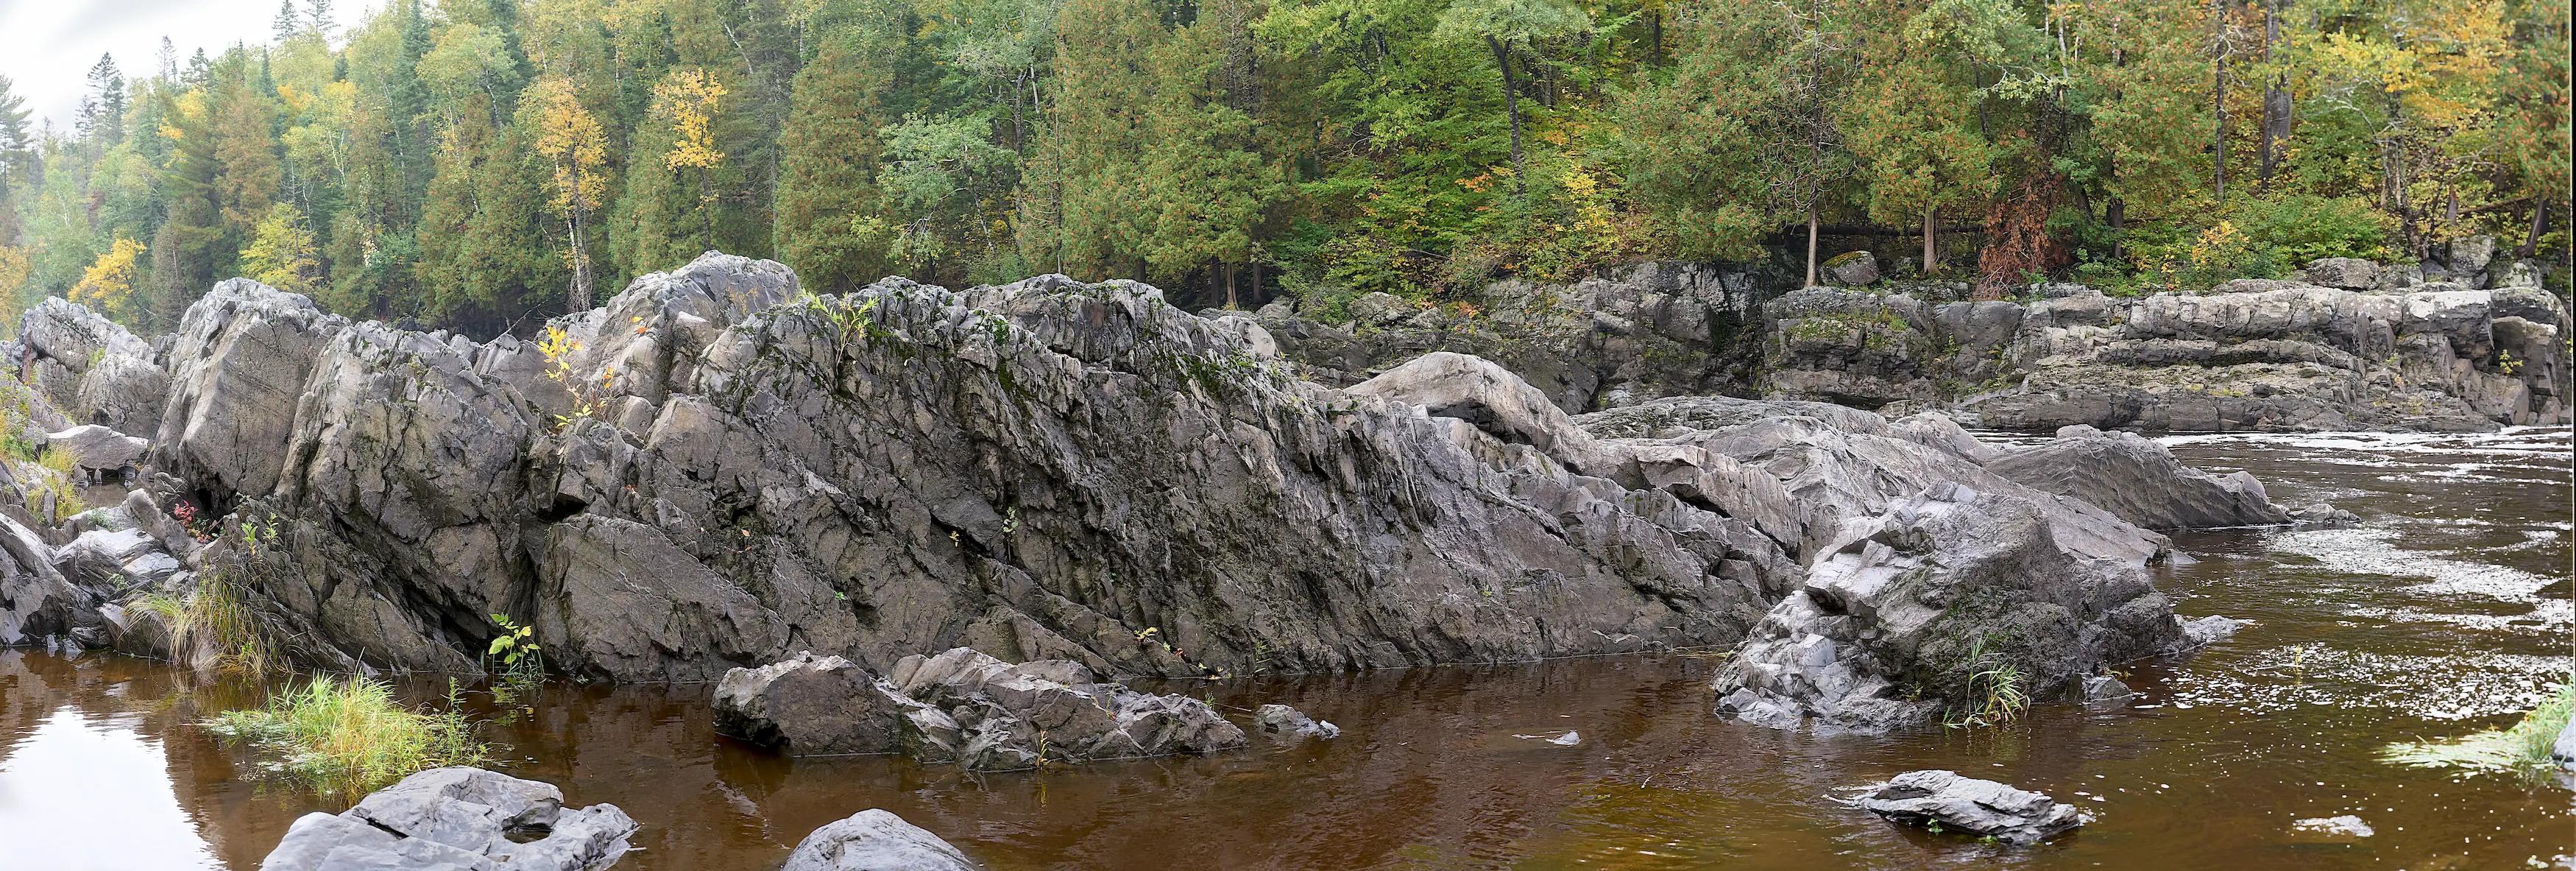 A rock formation in a still portion of a wide river. Trees are in the background.